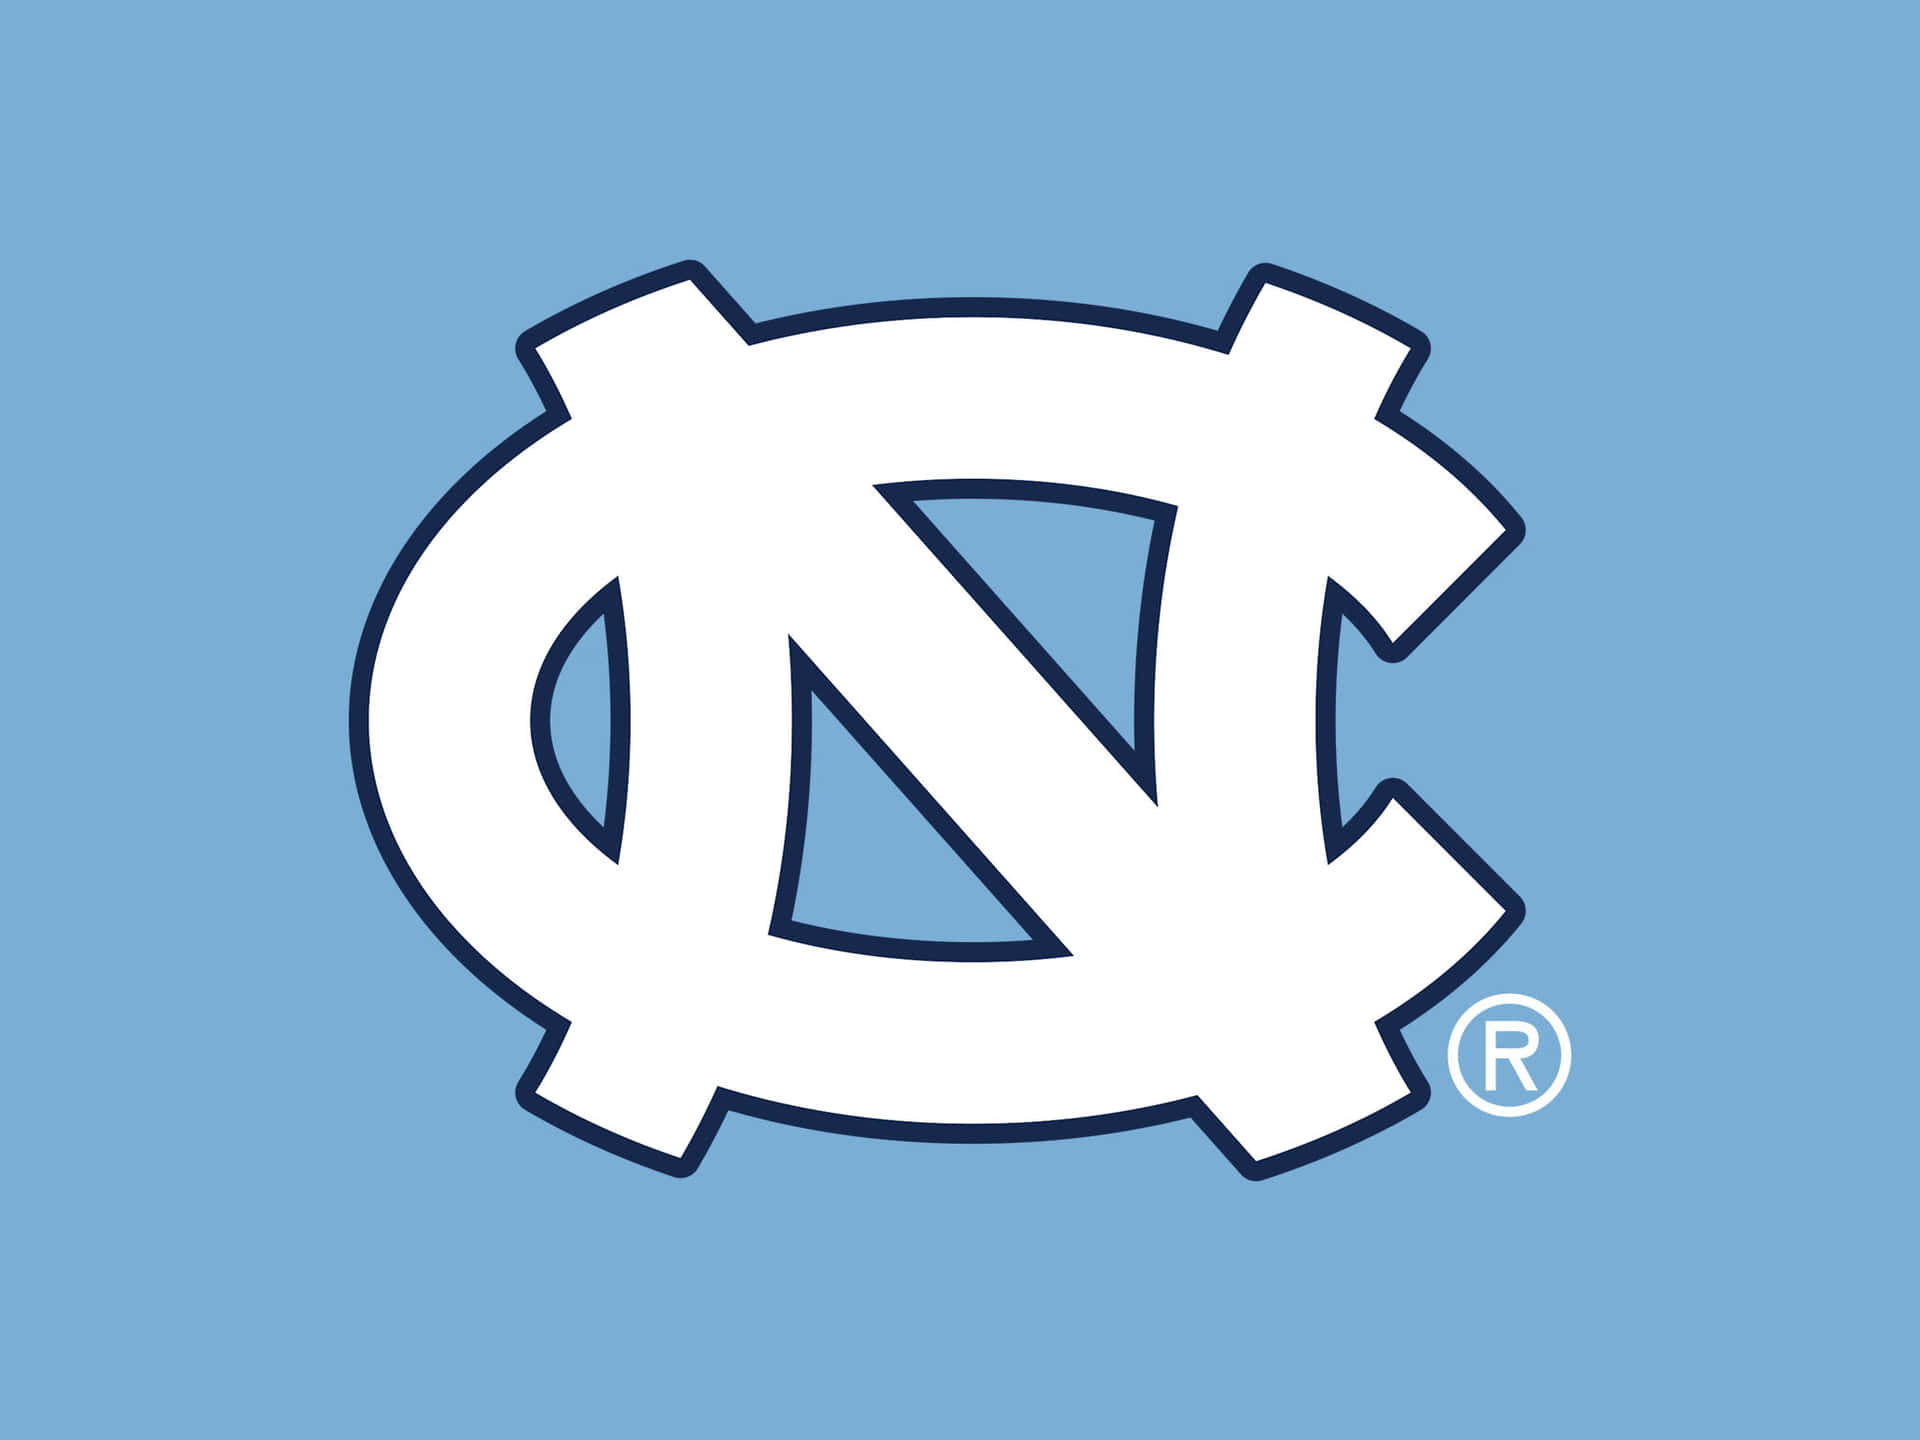 Show Your Support For The Tar Heels!